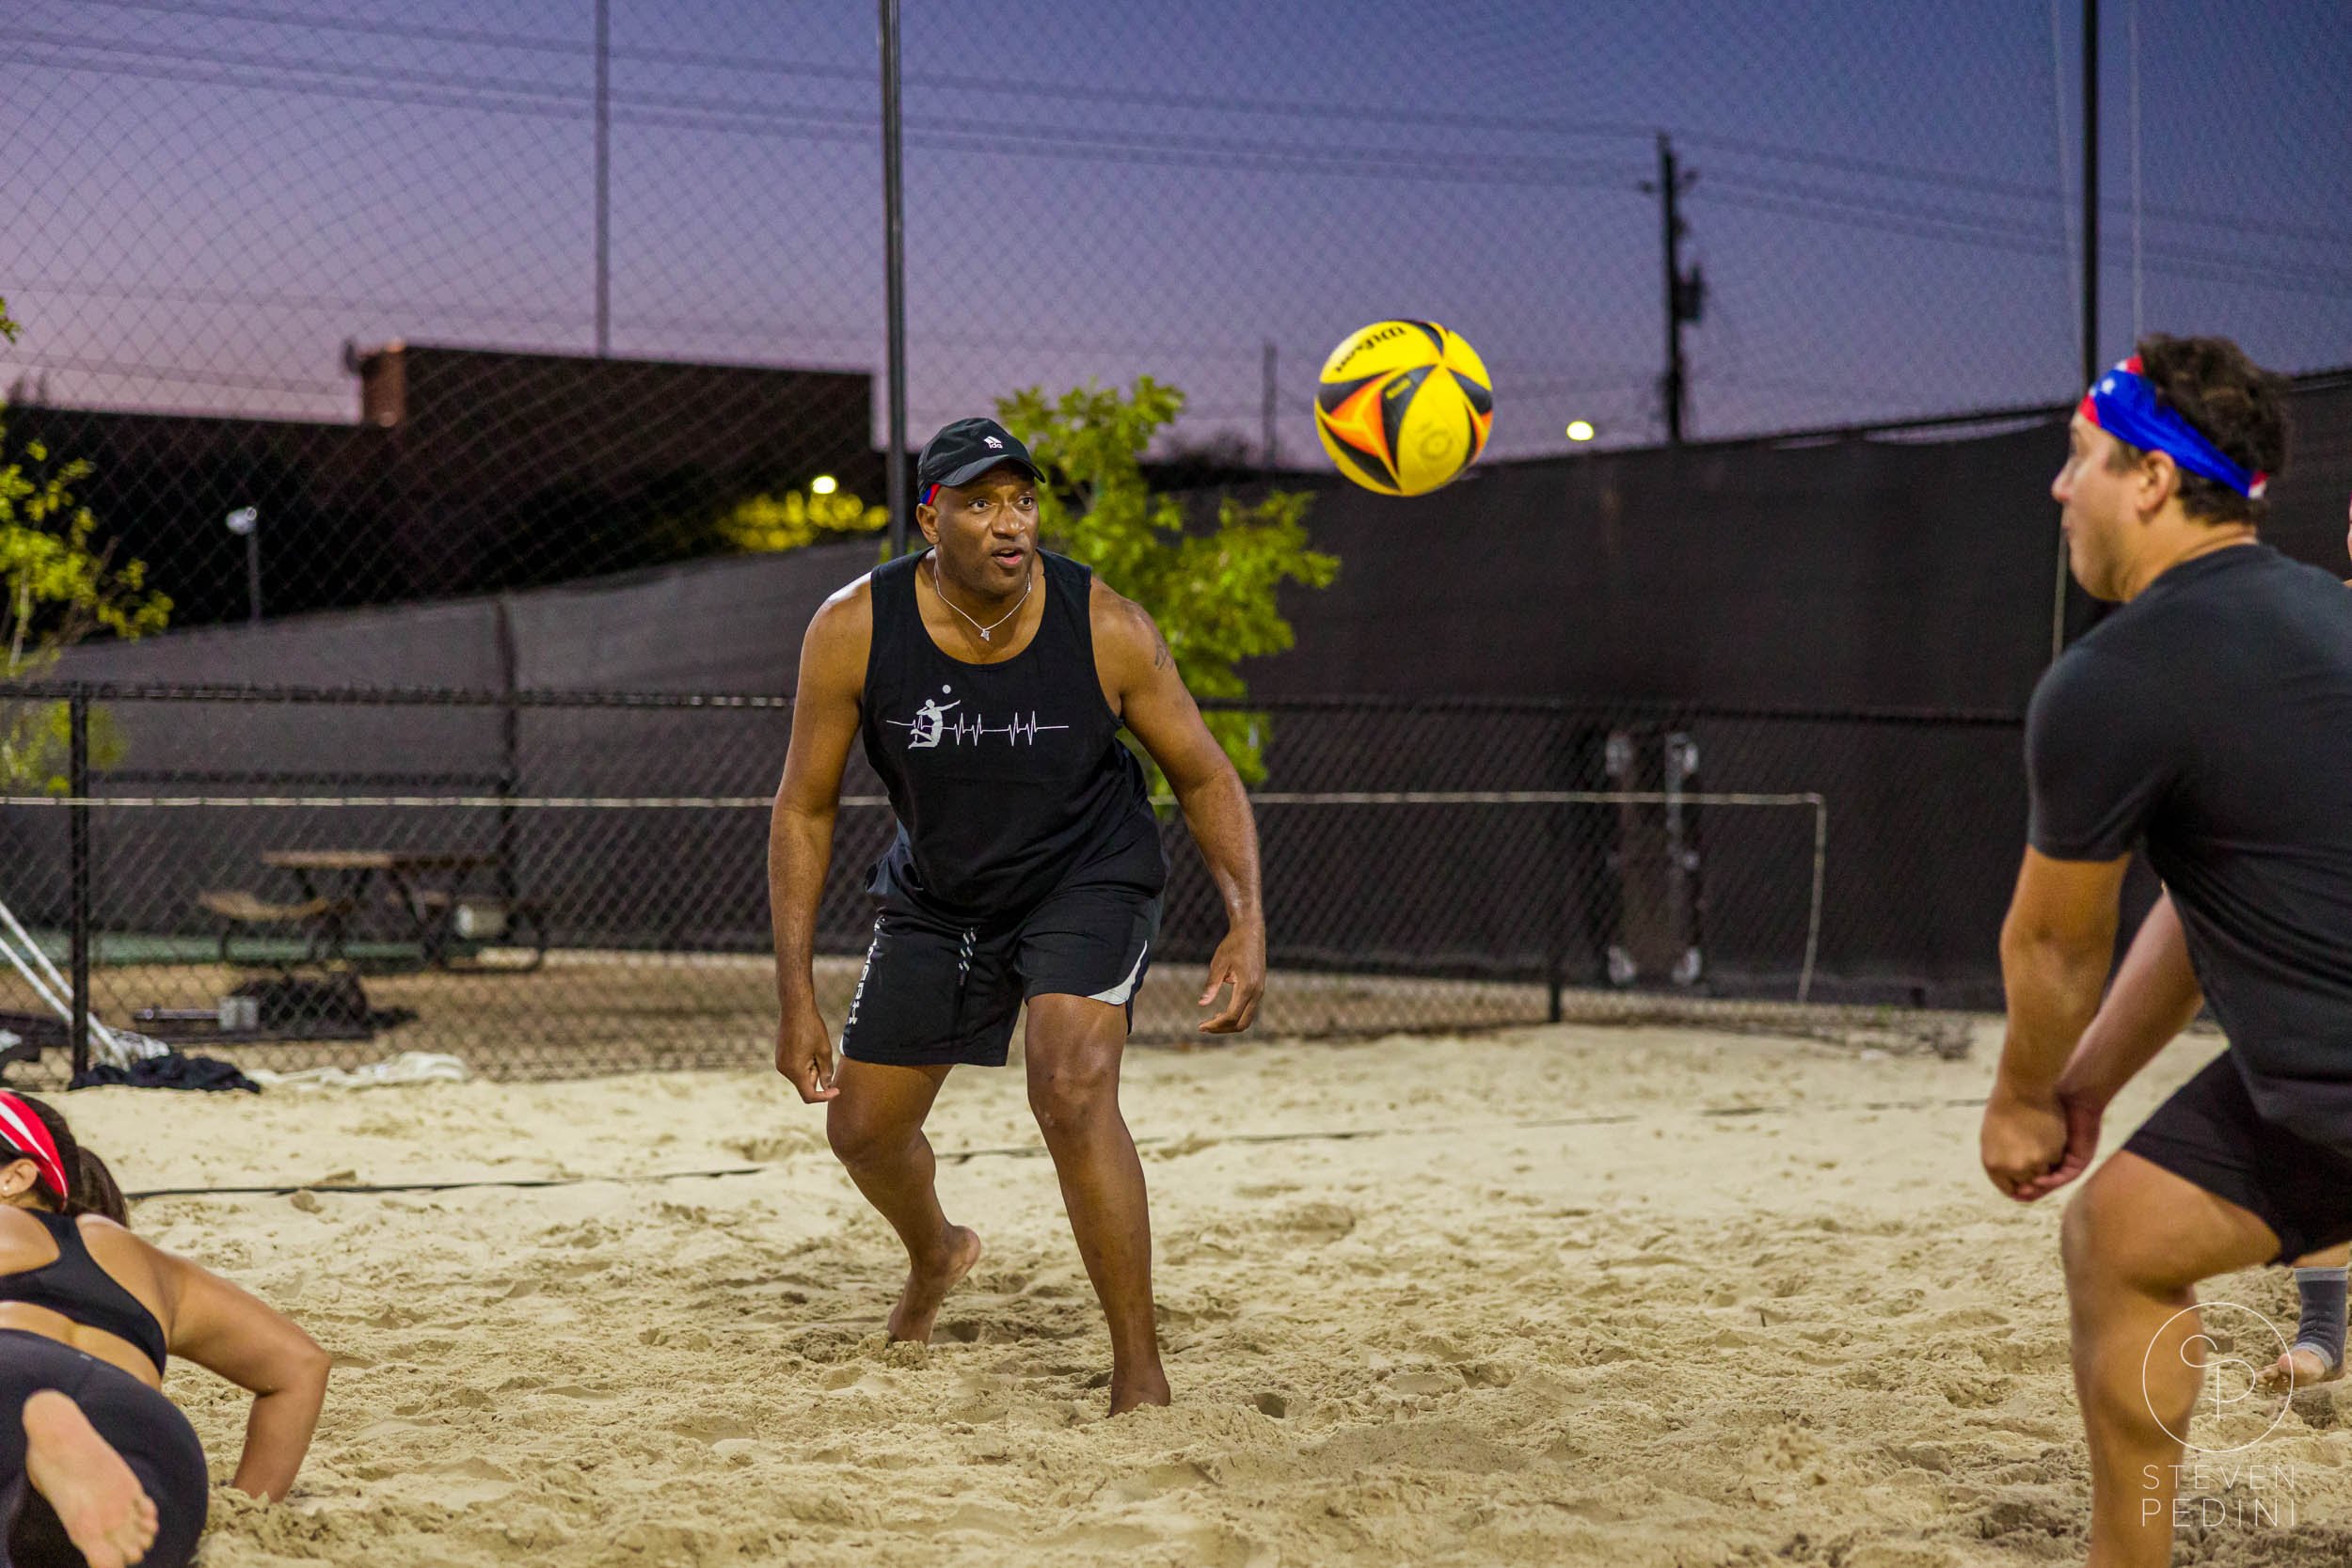 Steven Pedini Photography - Bumpy Pickle - Sand Volleyball - Houston TX - World Cup of Volleyball - 00312.jpg